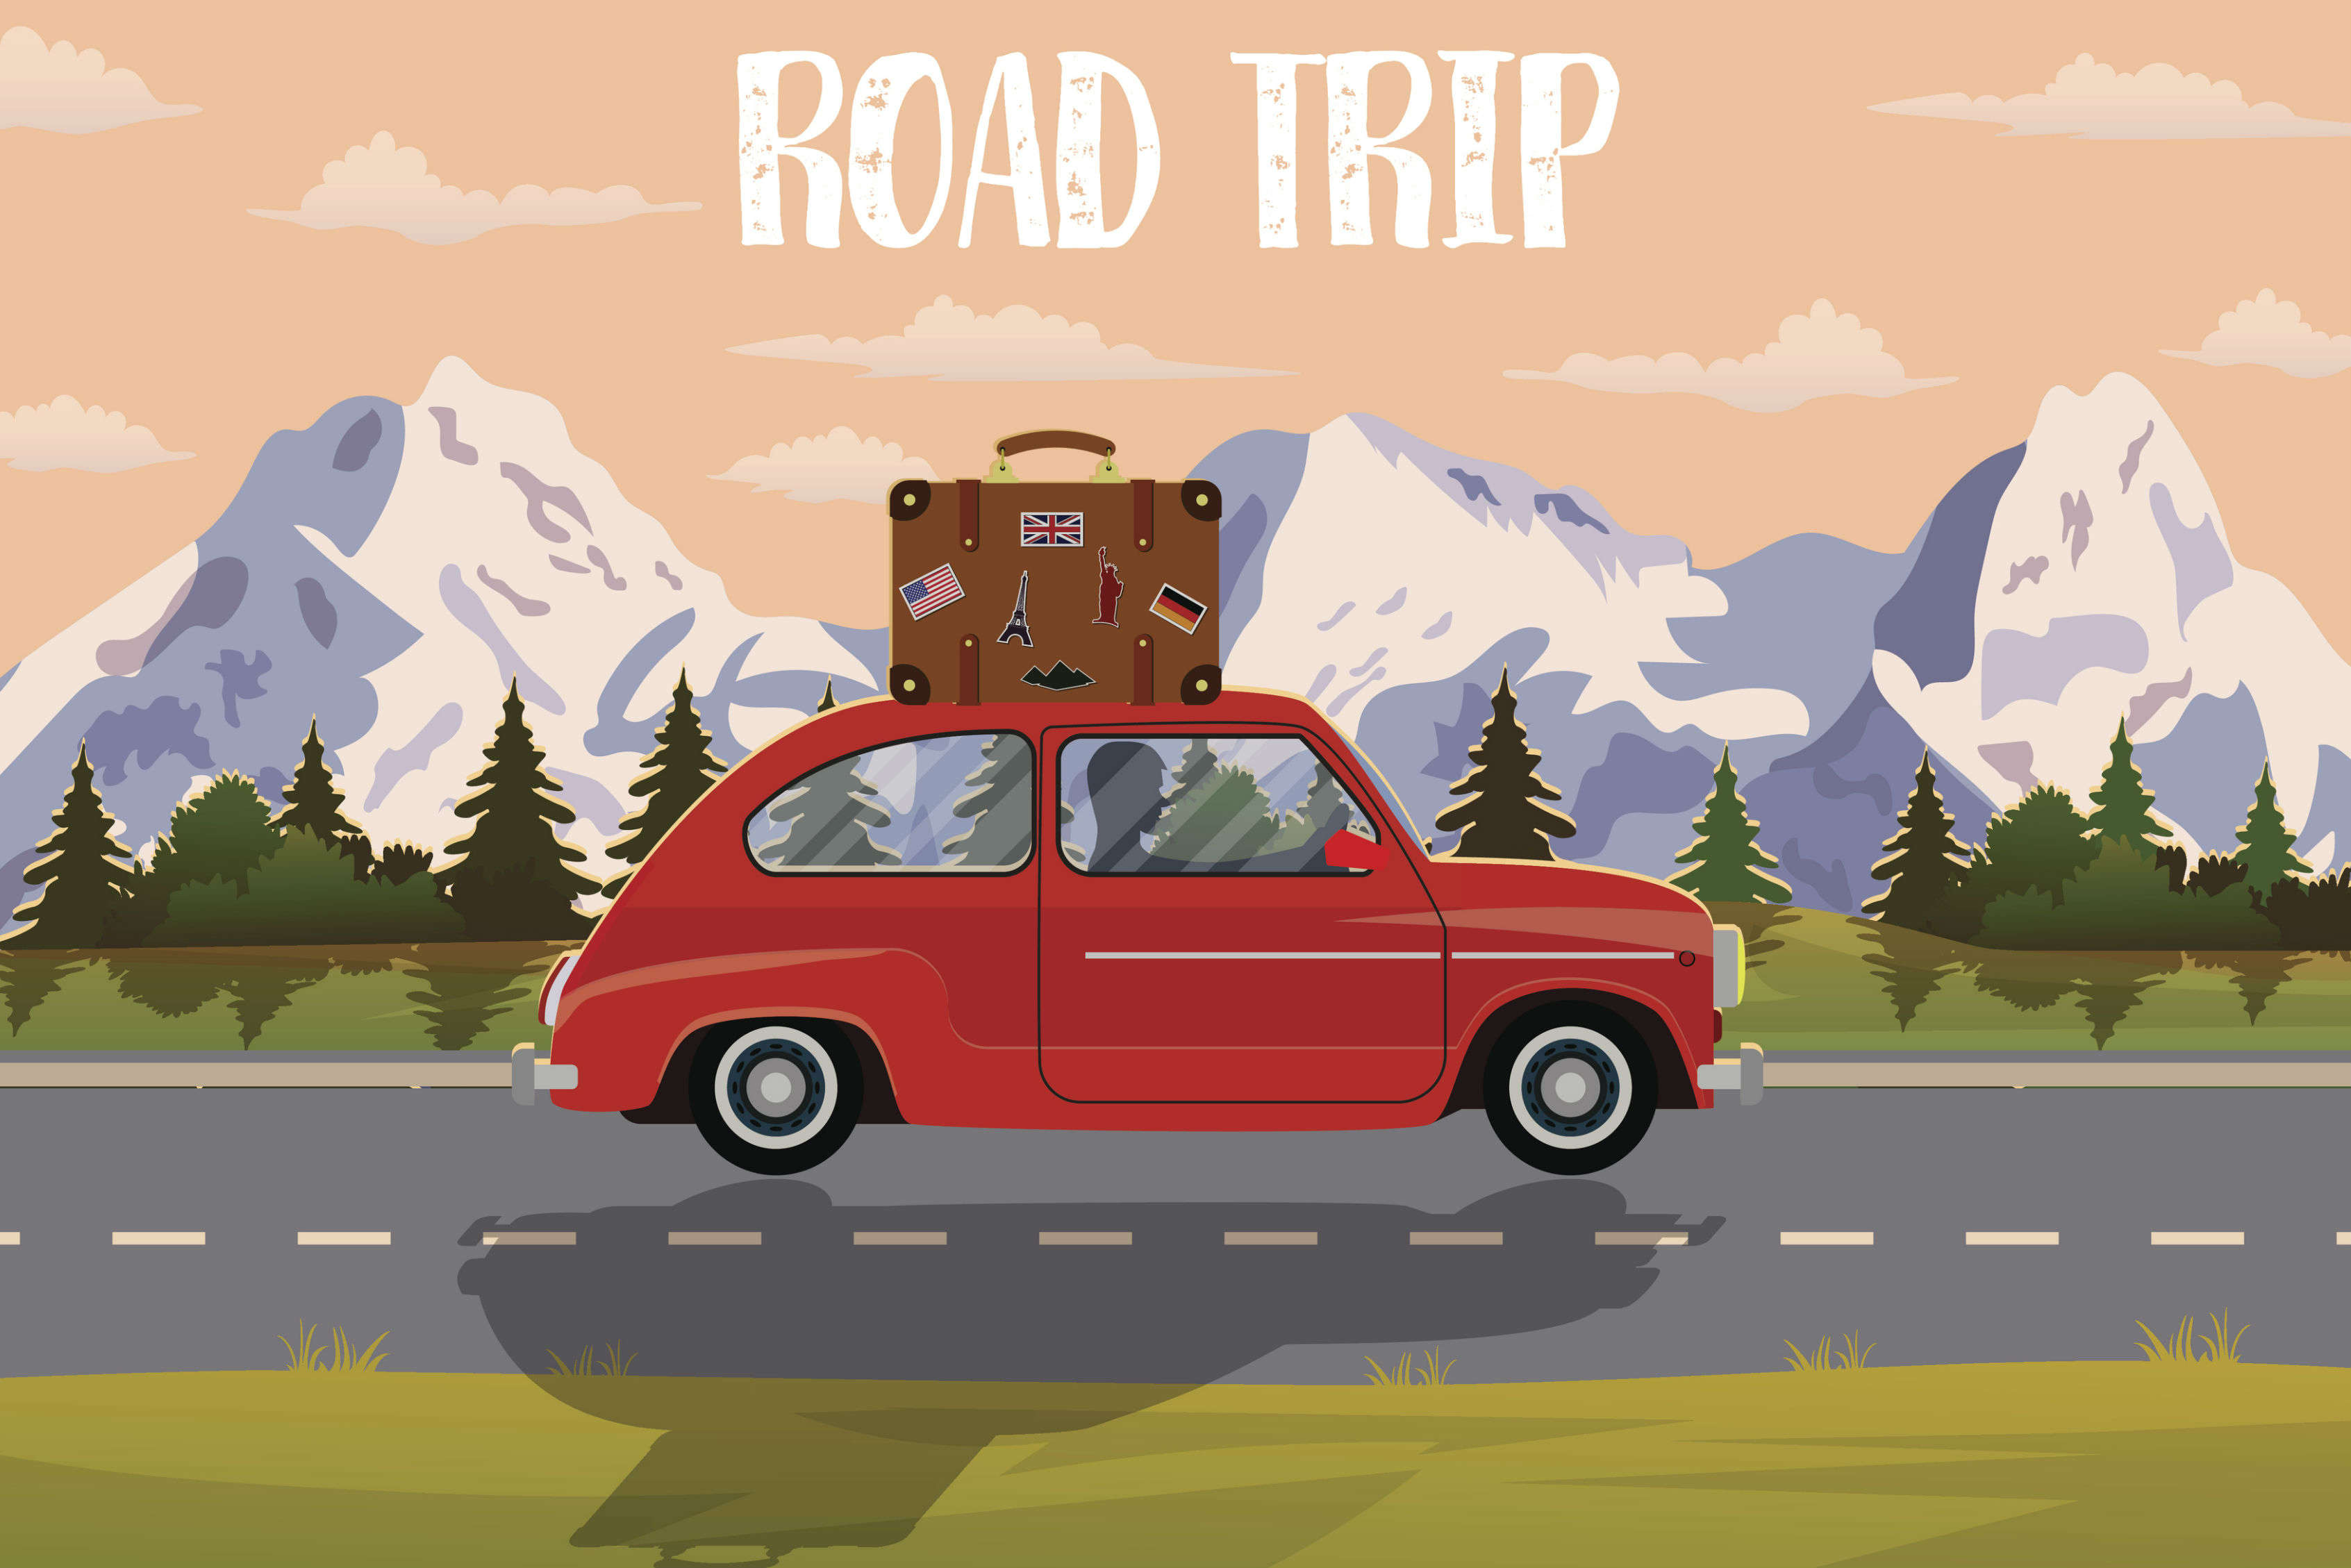 Road trip packing list : what to pack for a road trip checklist